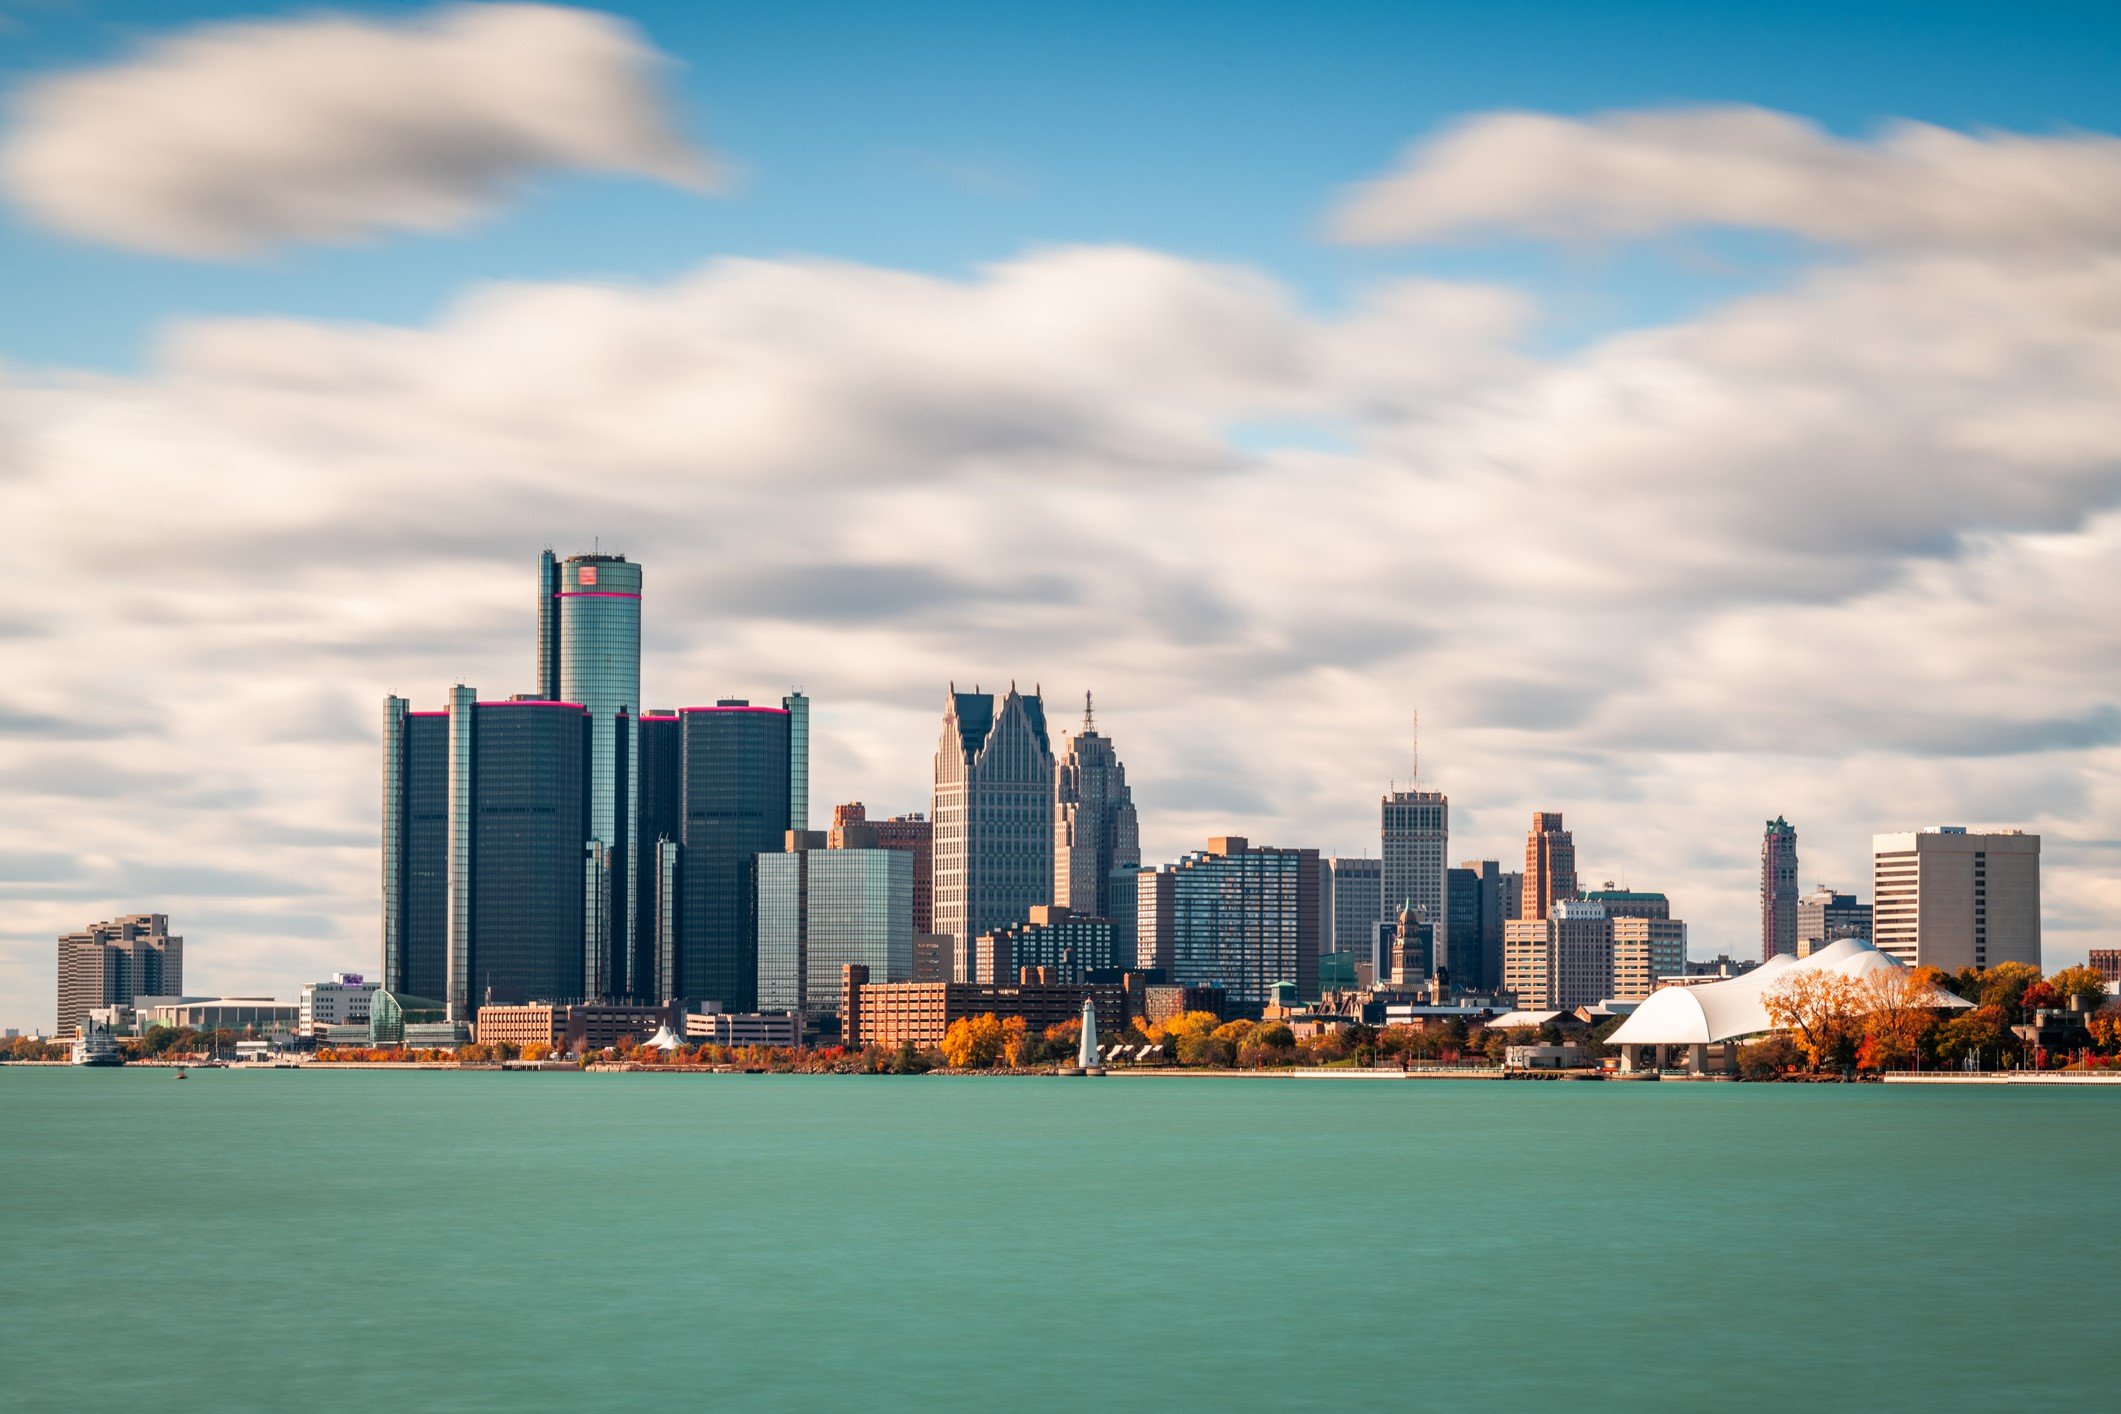 Detroit Michigan USA on the Detroit River - stock photo Sean PavoneGetty Images